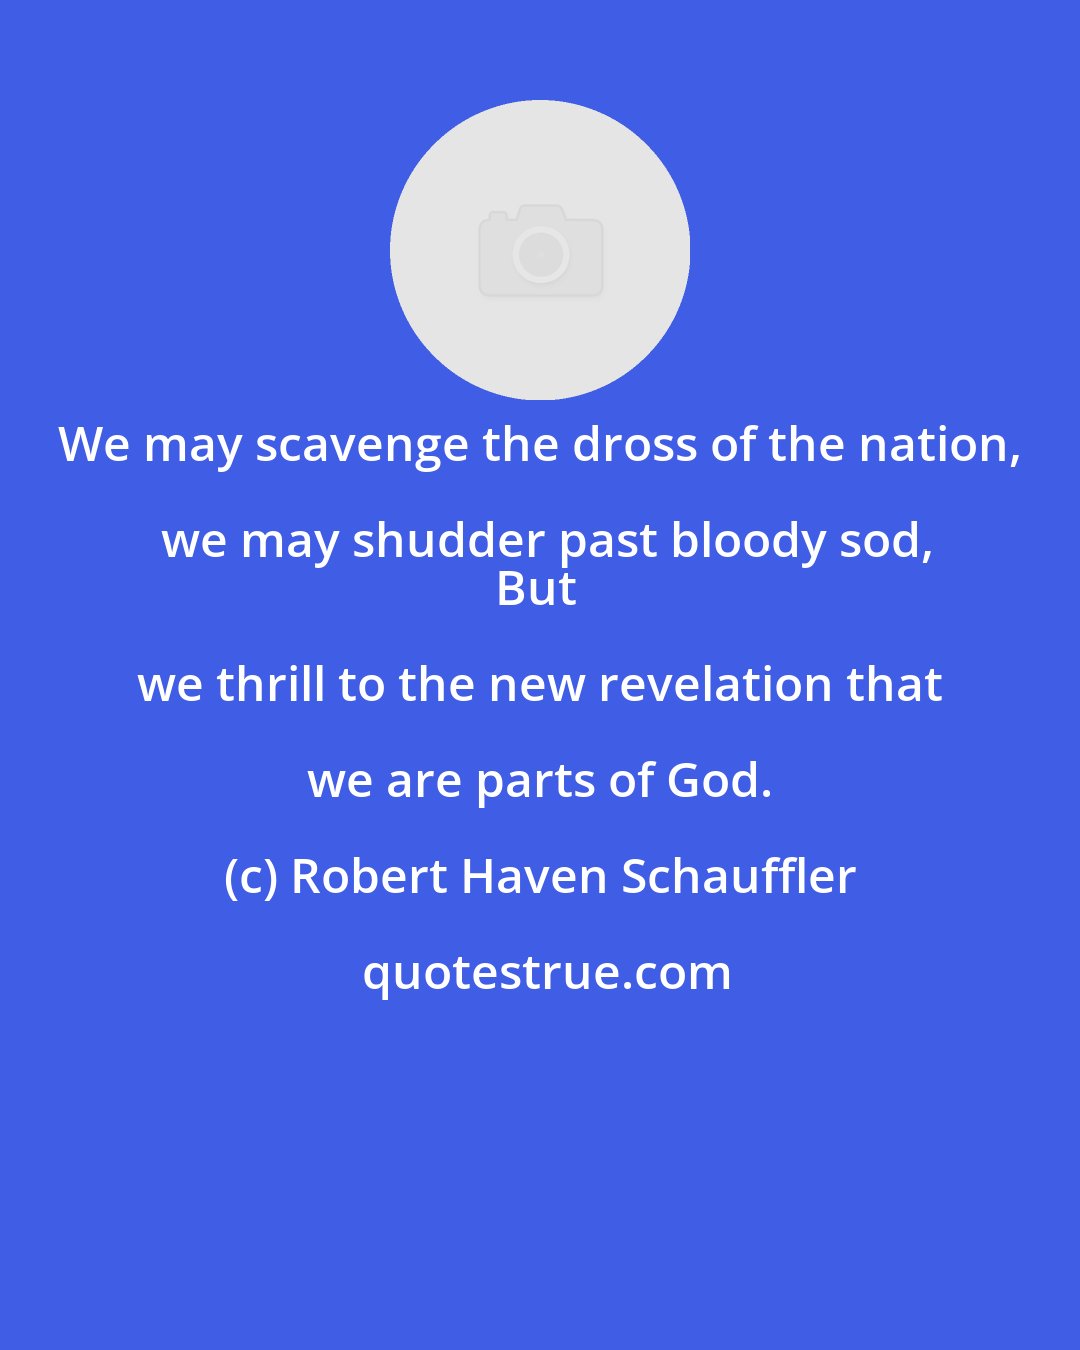 Robert Haven Schauffler: We may scavenge the dross of the nation, we may shudder past bloody sod,
But we thrill to the new revelation that we are parts of God.